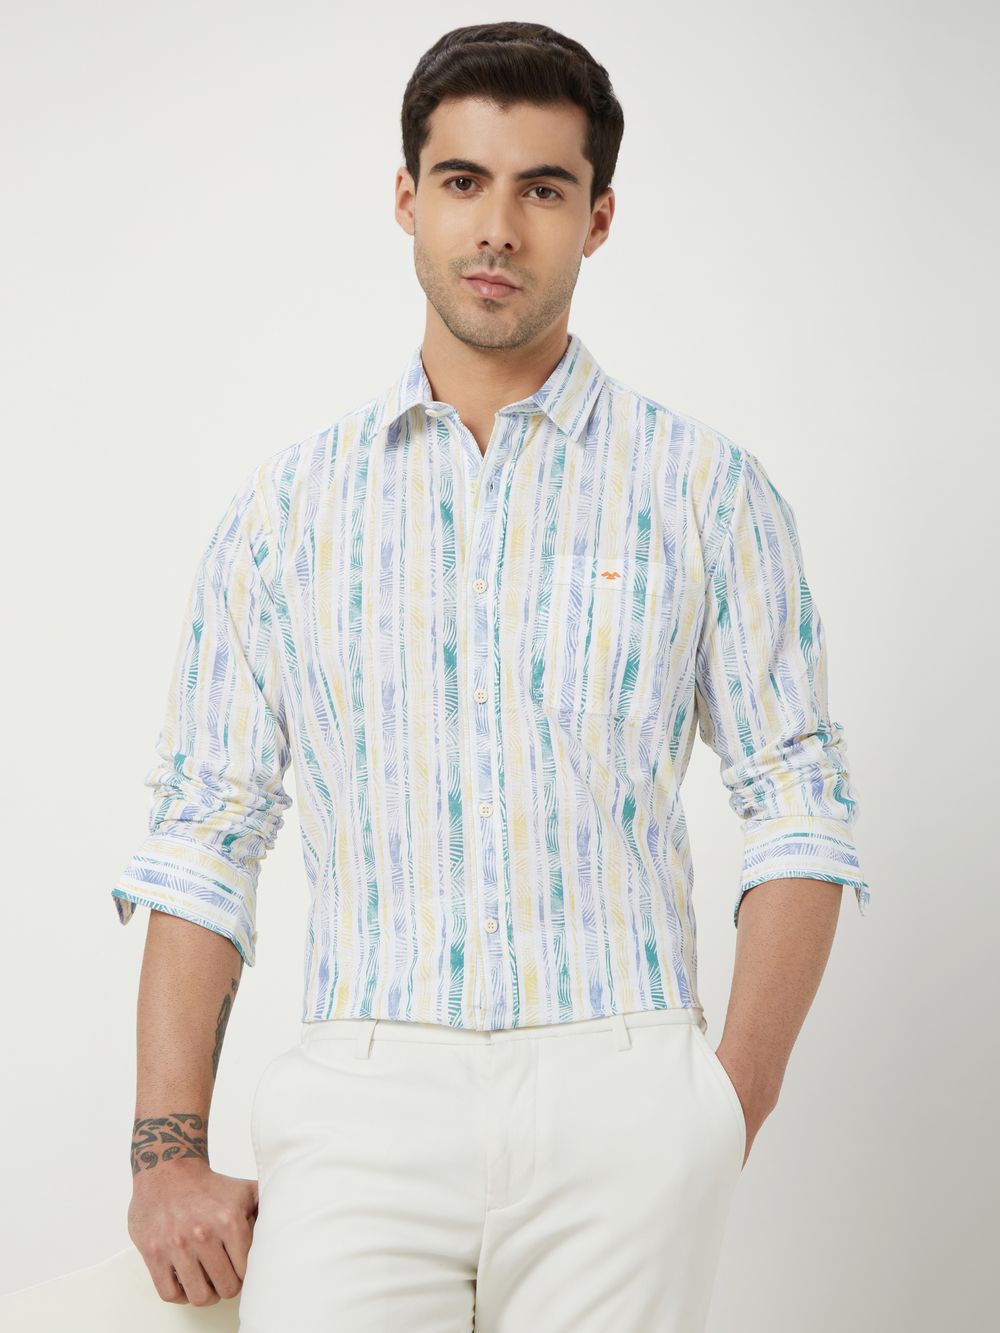 Off White & Yellow Leaf Print Slim Fit Casual Shirt